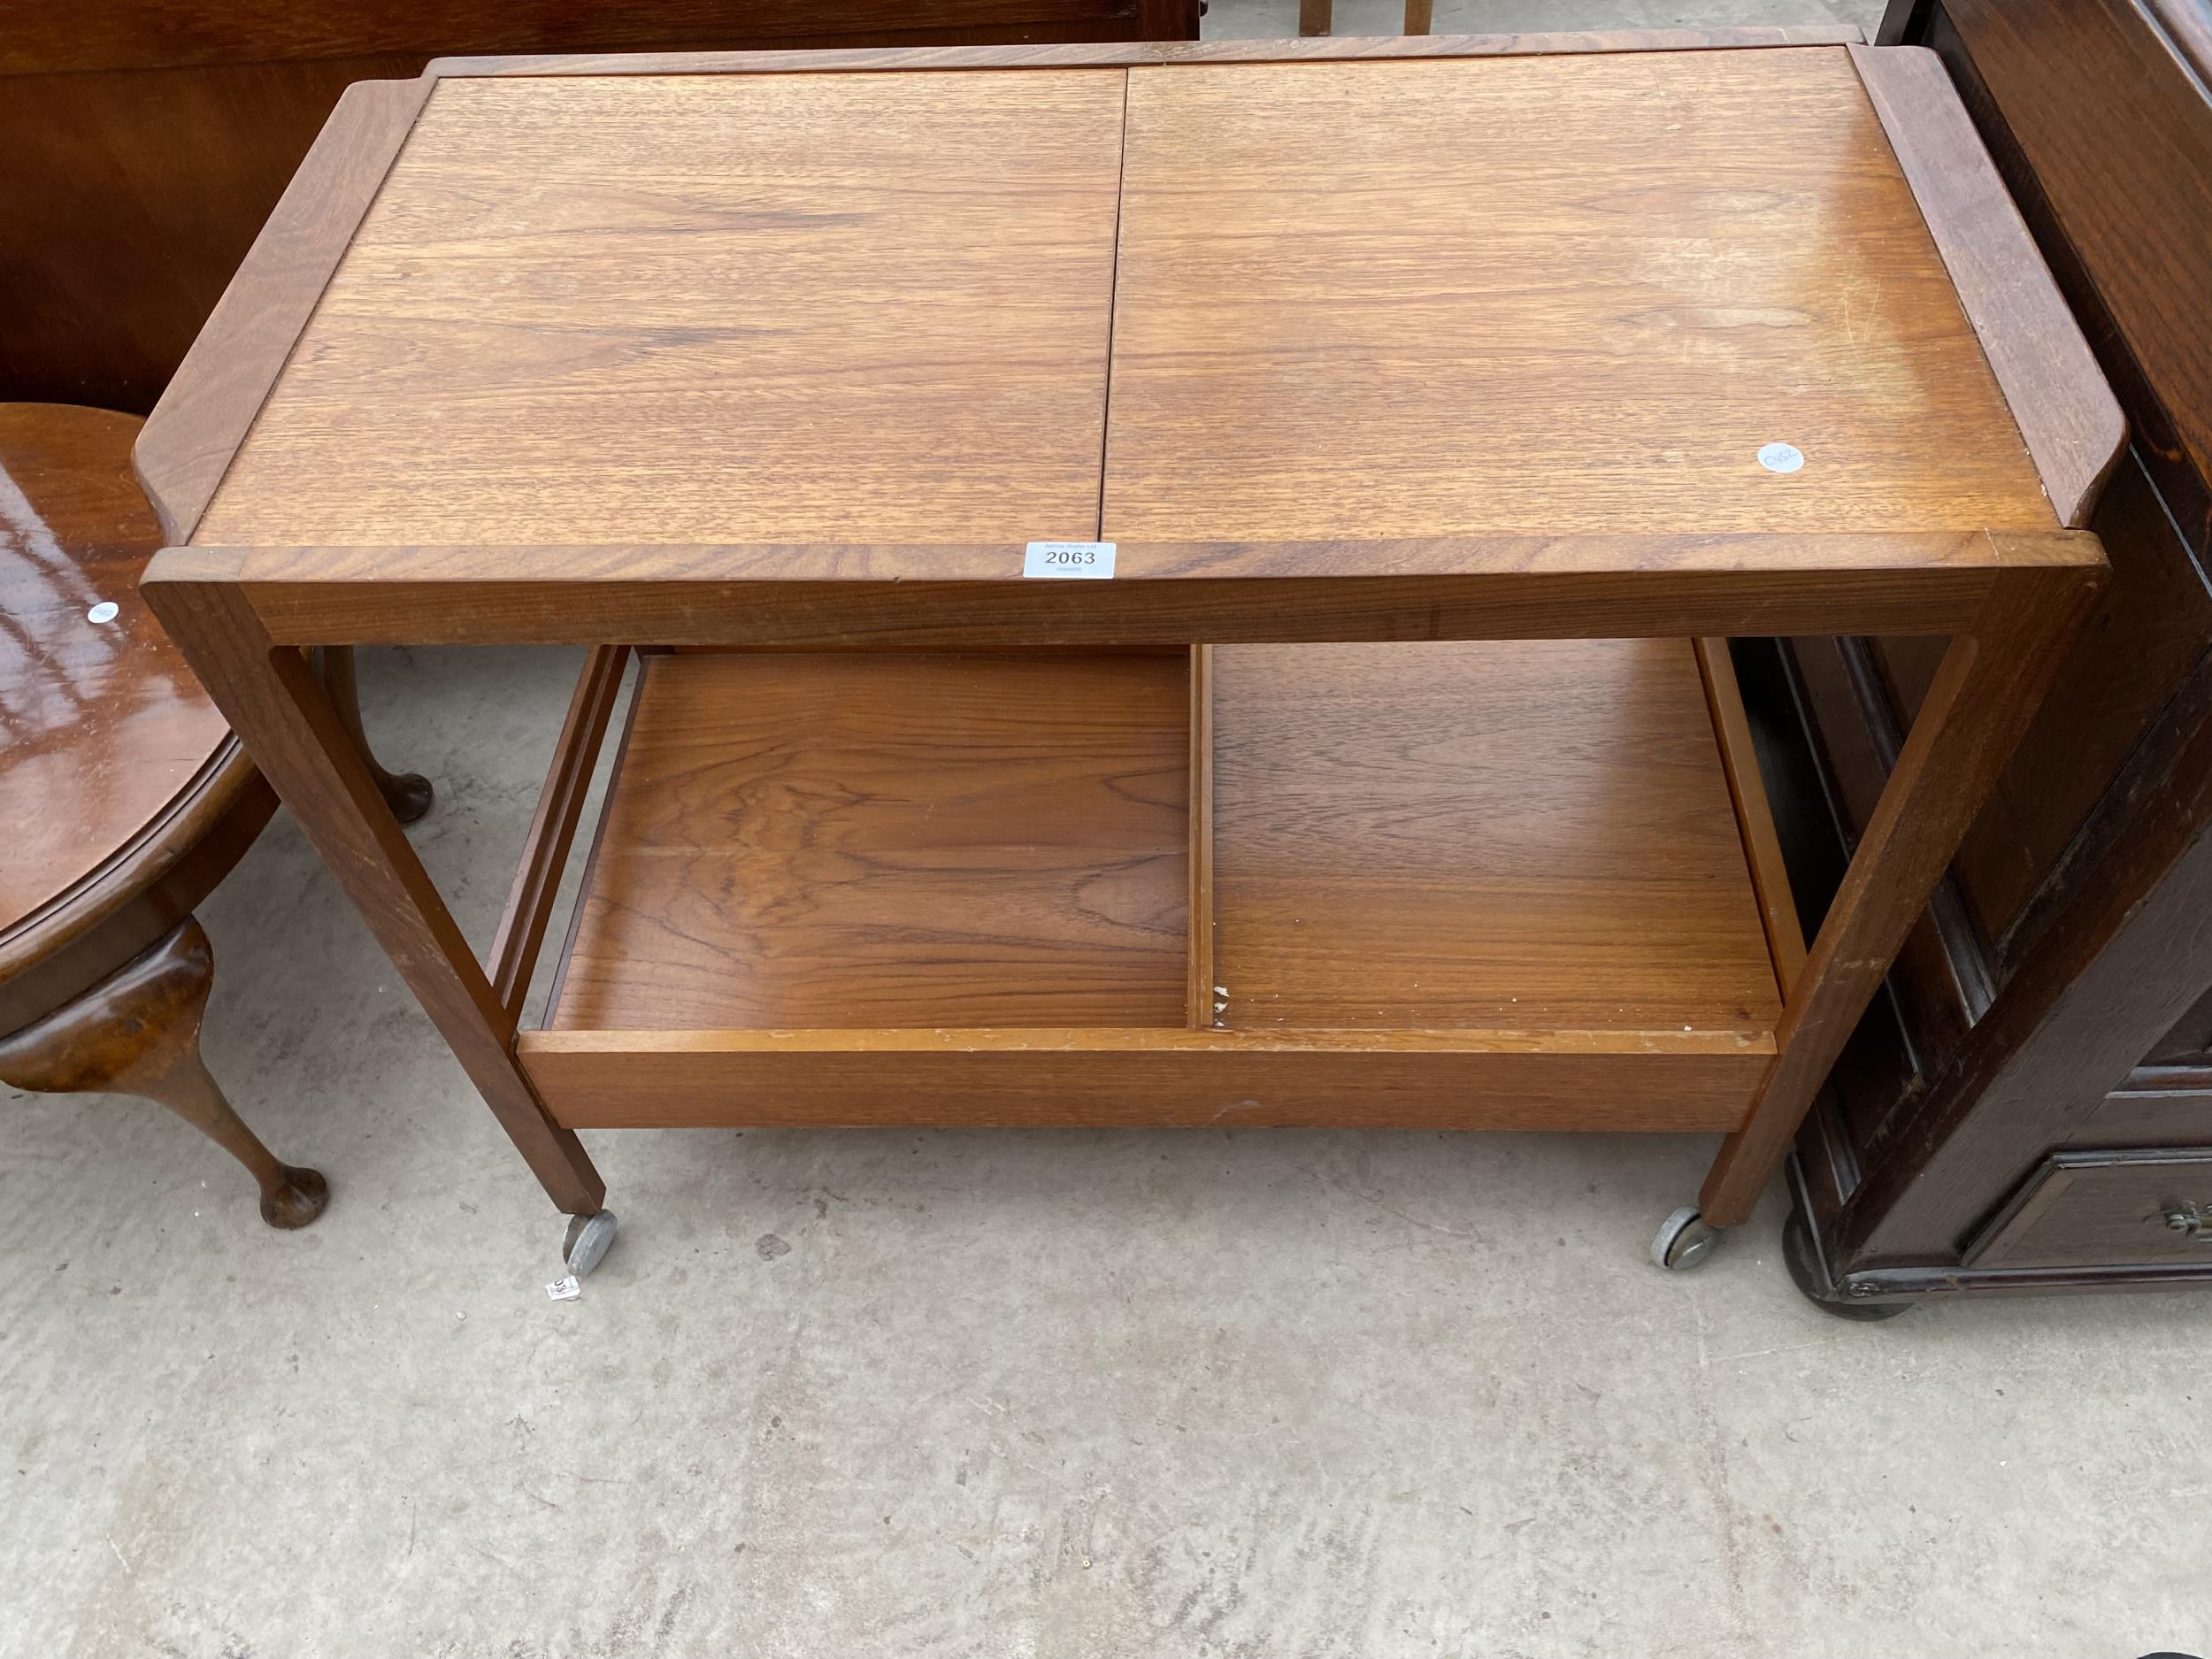 A RETRO TEAK REMPLOY TWO TIER TROLLEY WITH SINGLE DRAWER AND PULL-OUT TOP SECTION, 35X18"